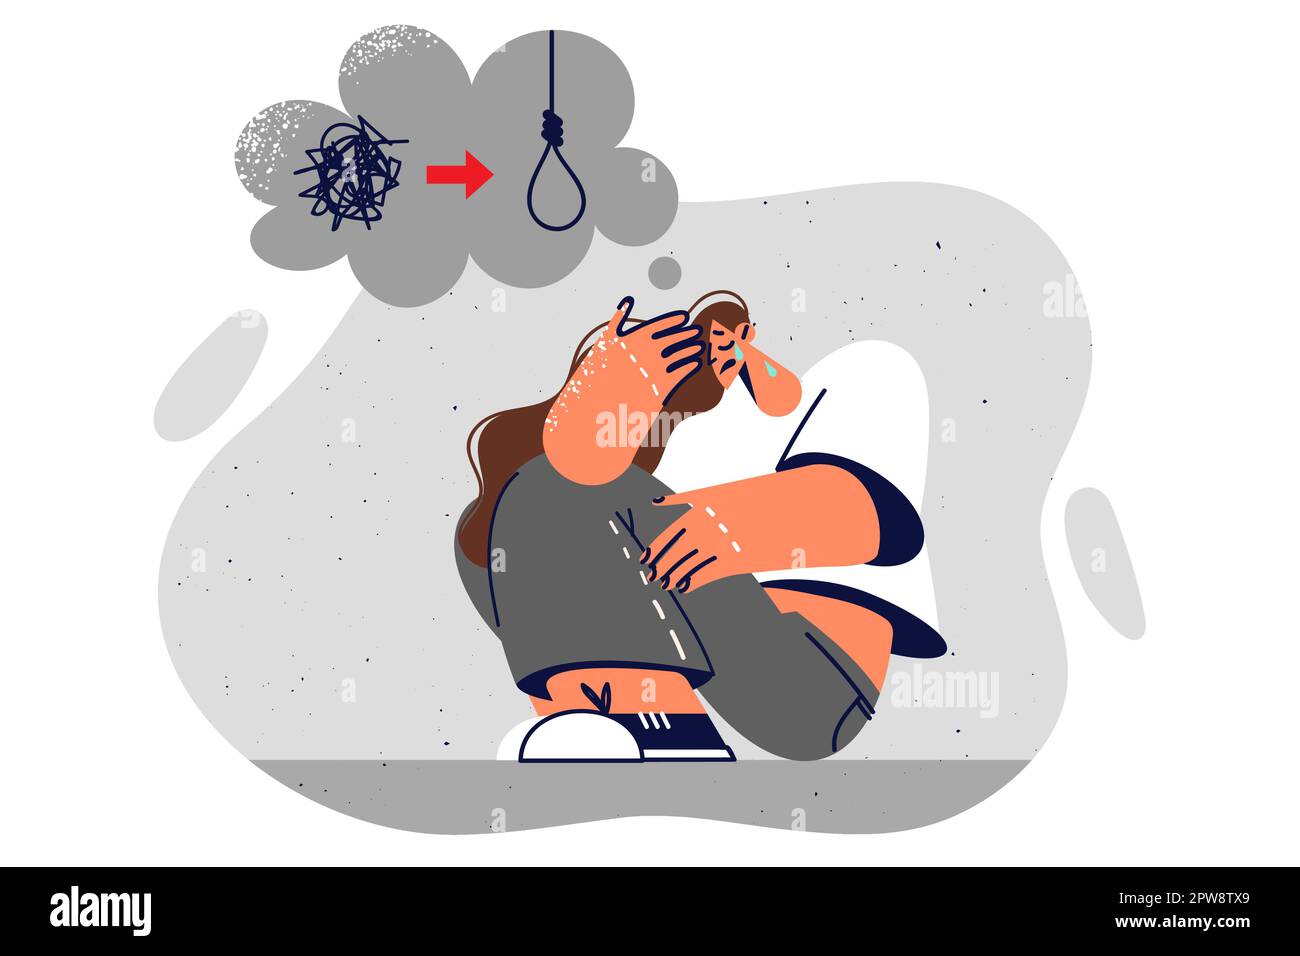 Depressed woman sits on ground contemplating suicide due to unresolved issues in personal life Stock Vector